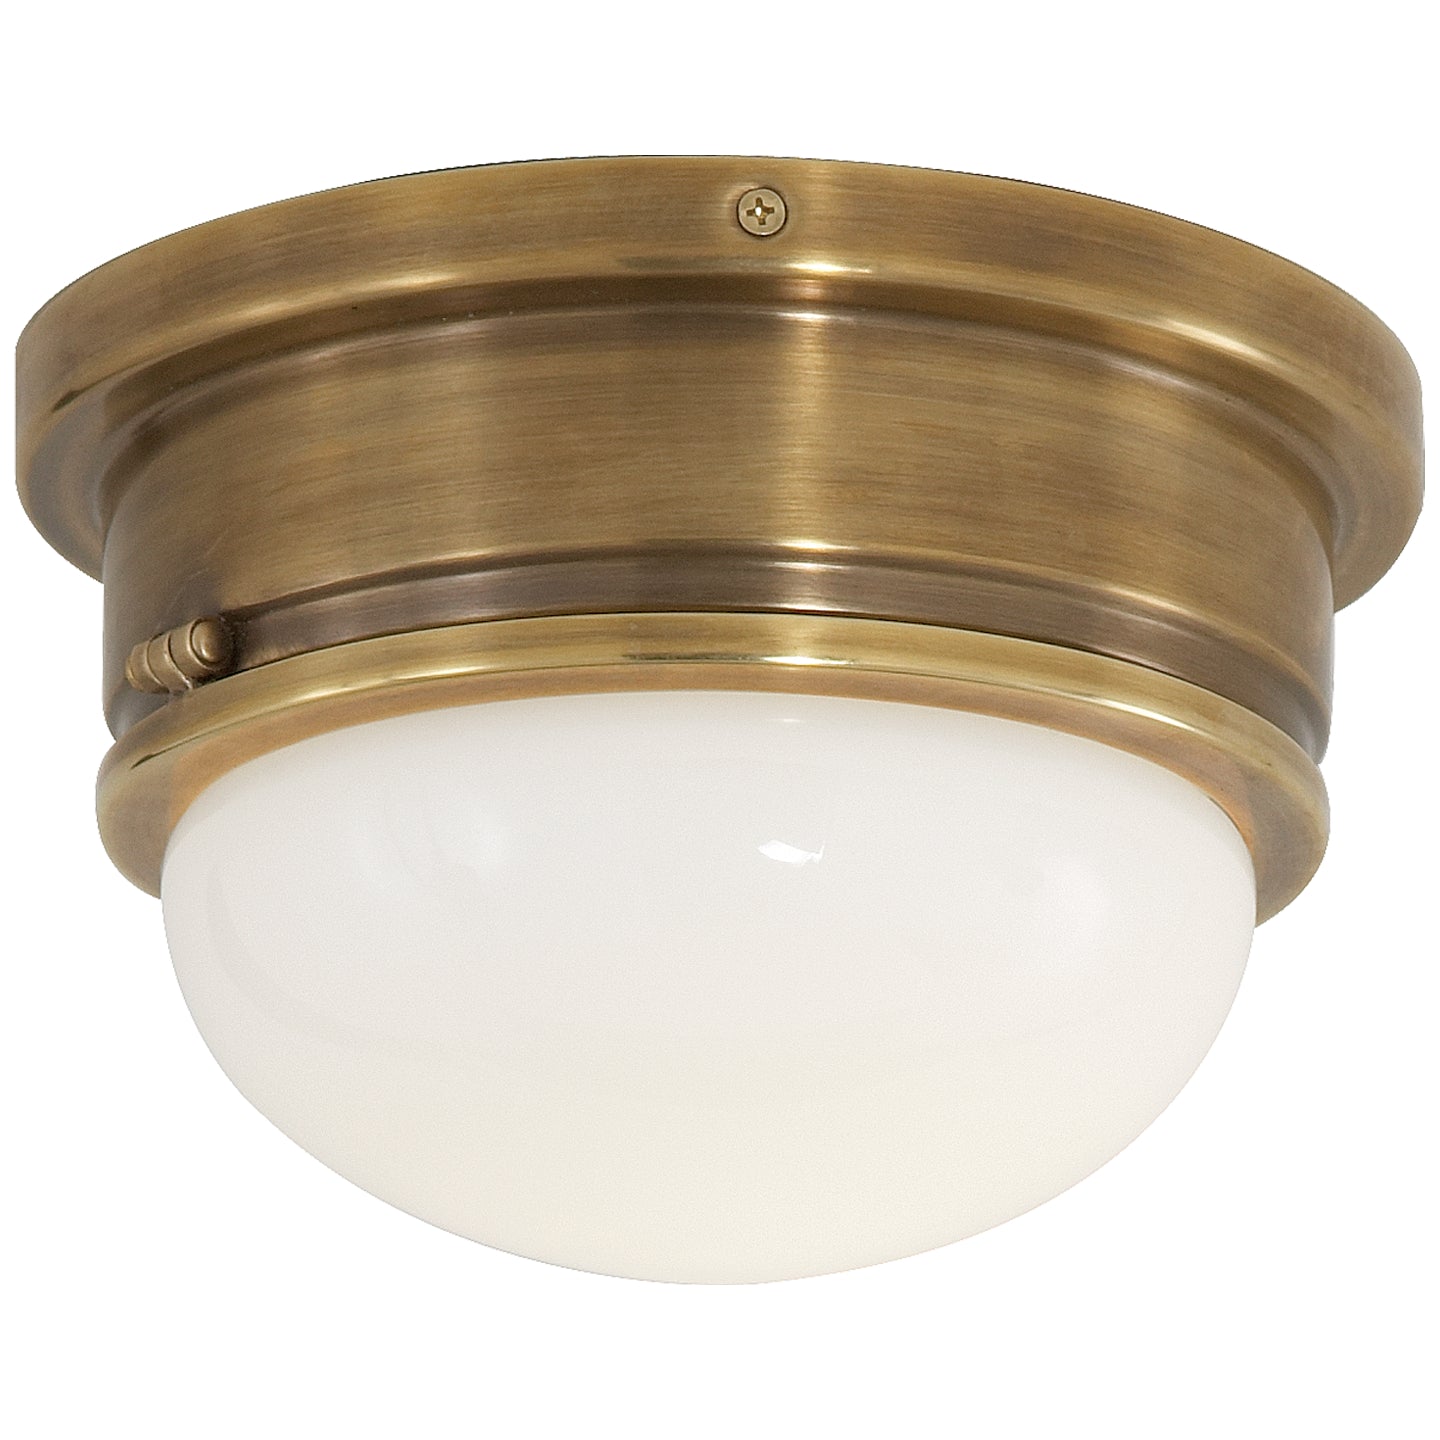 Load image into Gallery viewer, Visual Comfort Signature - SL 4001HAB-WG - One Light Flush Mount - Marine - Hand-Rubbed Antique Brass
